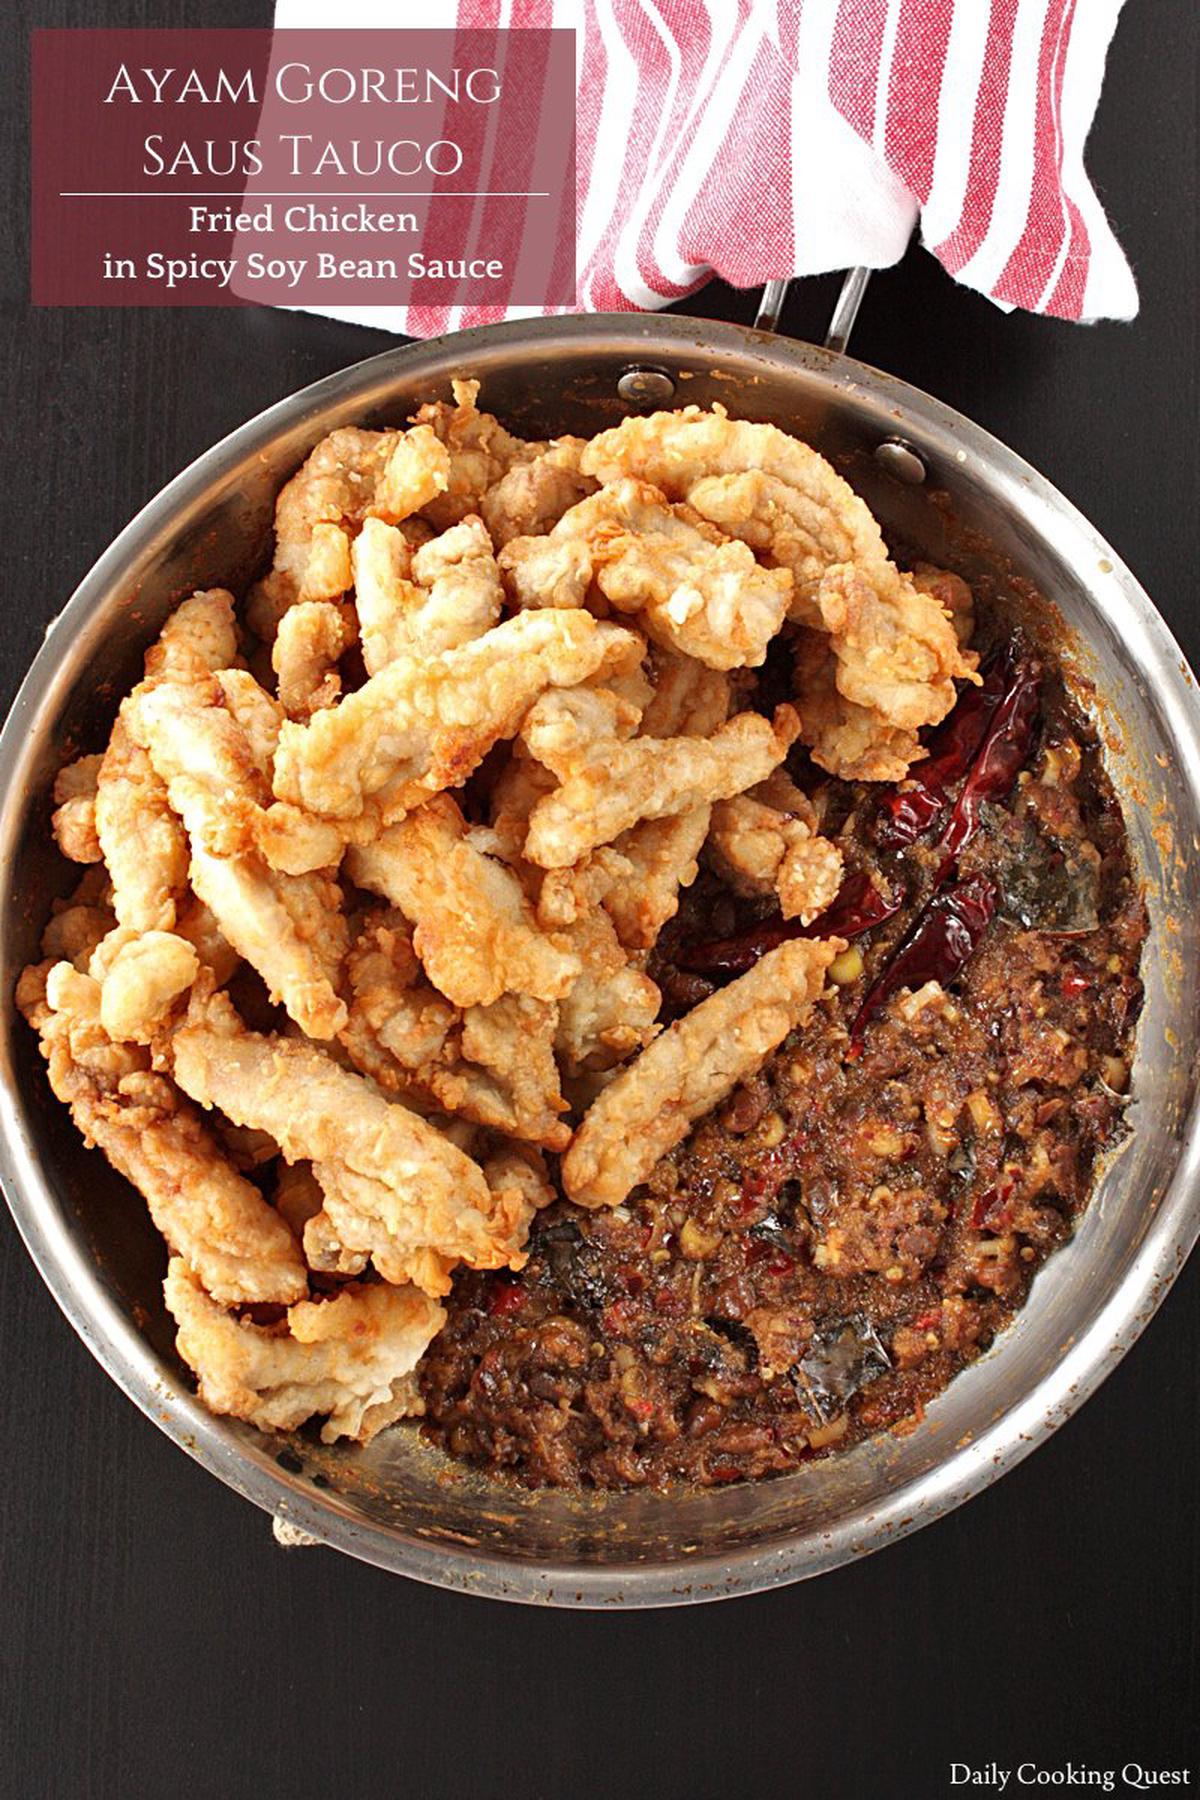 Ayam Goreng Saus Tauco - Fried Chicken in Spicy Soy Bean Sauce